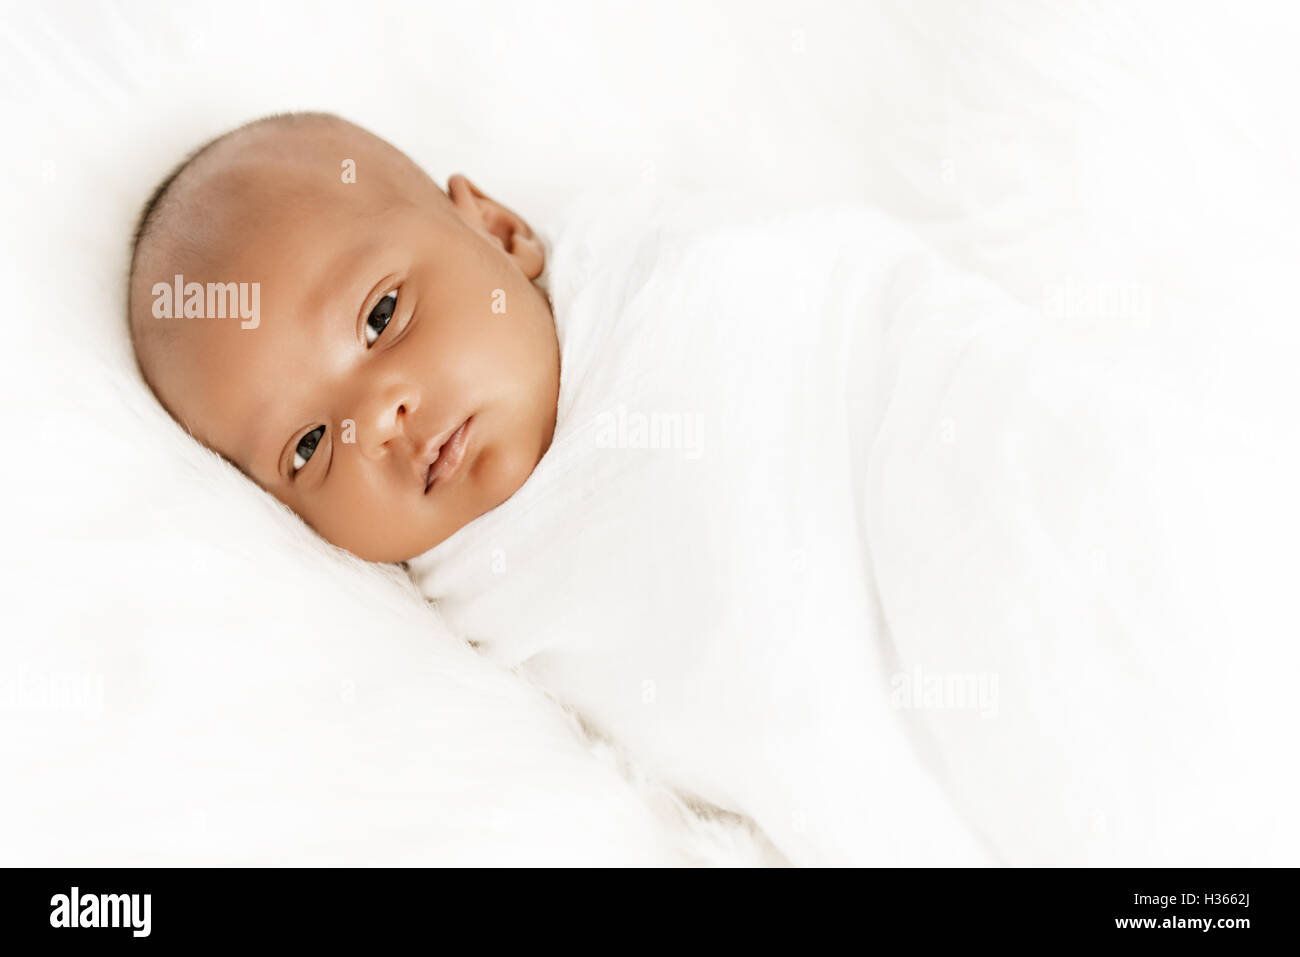 Three weeks old baby sleeping on white blanket cute infant newborn lying down close up shot eyes open Stock Photo